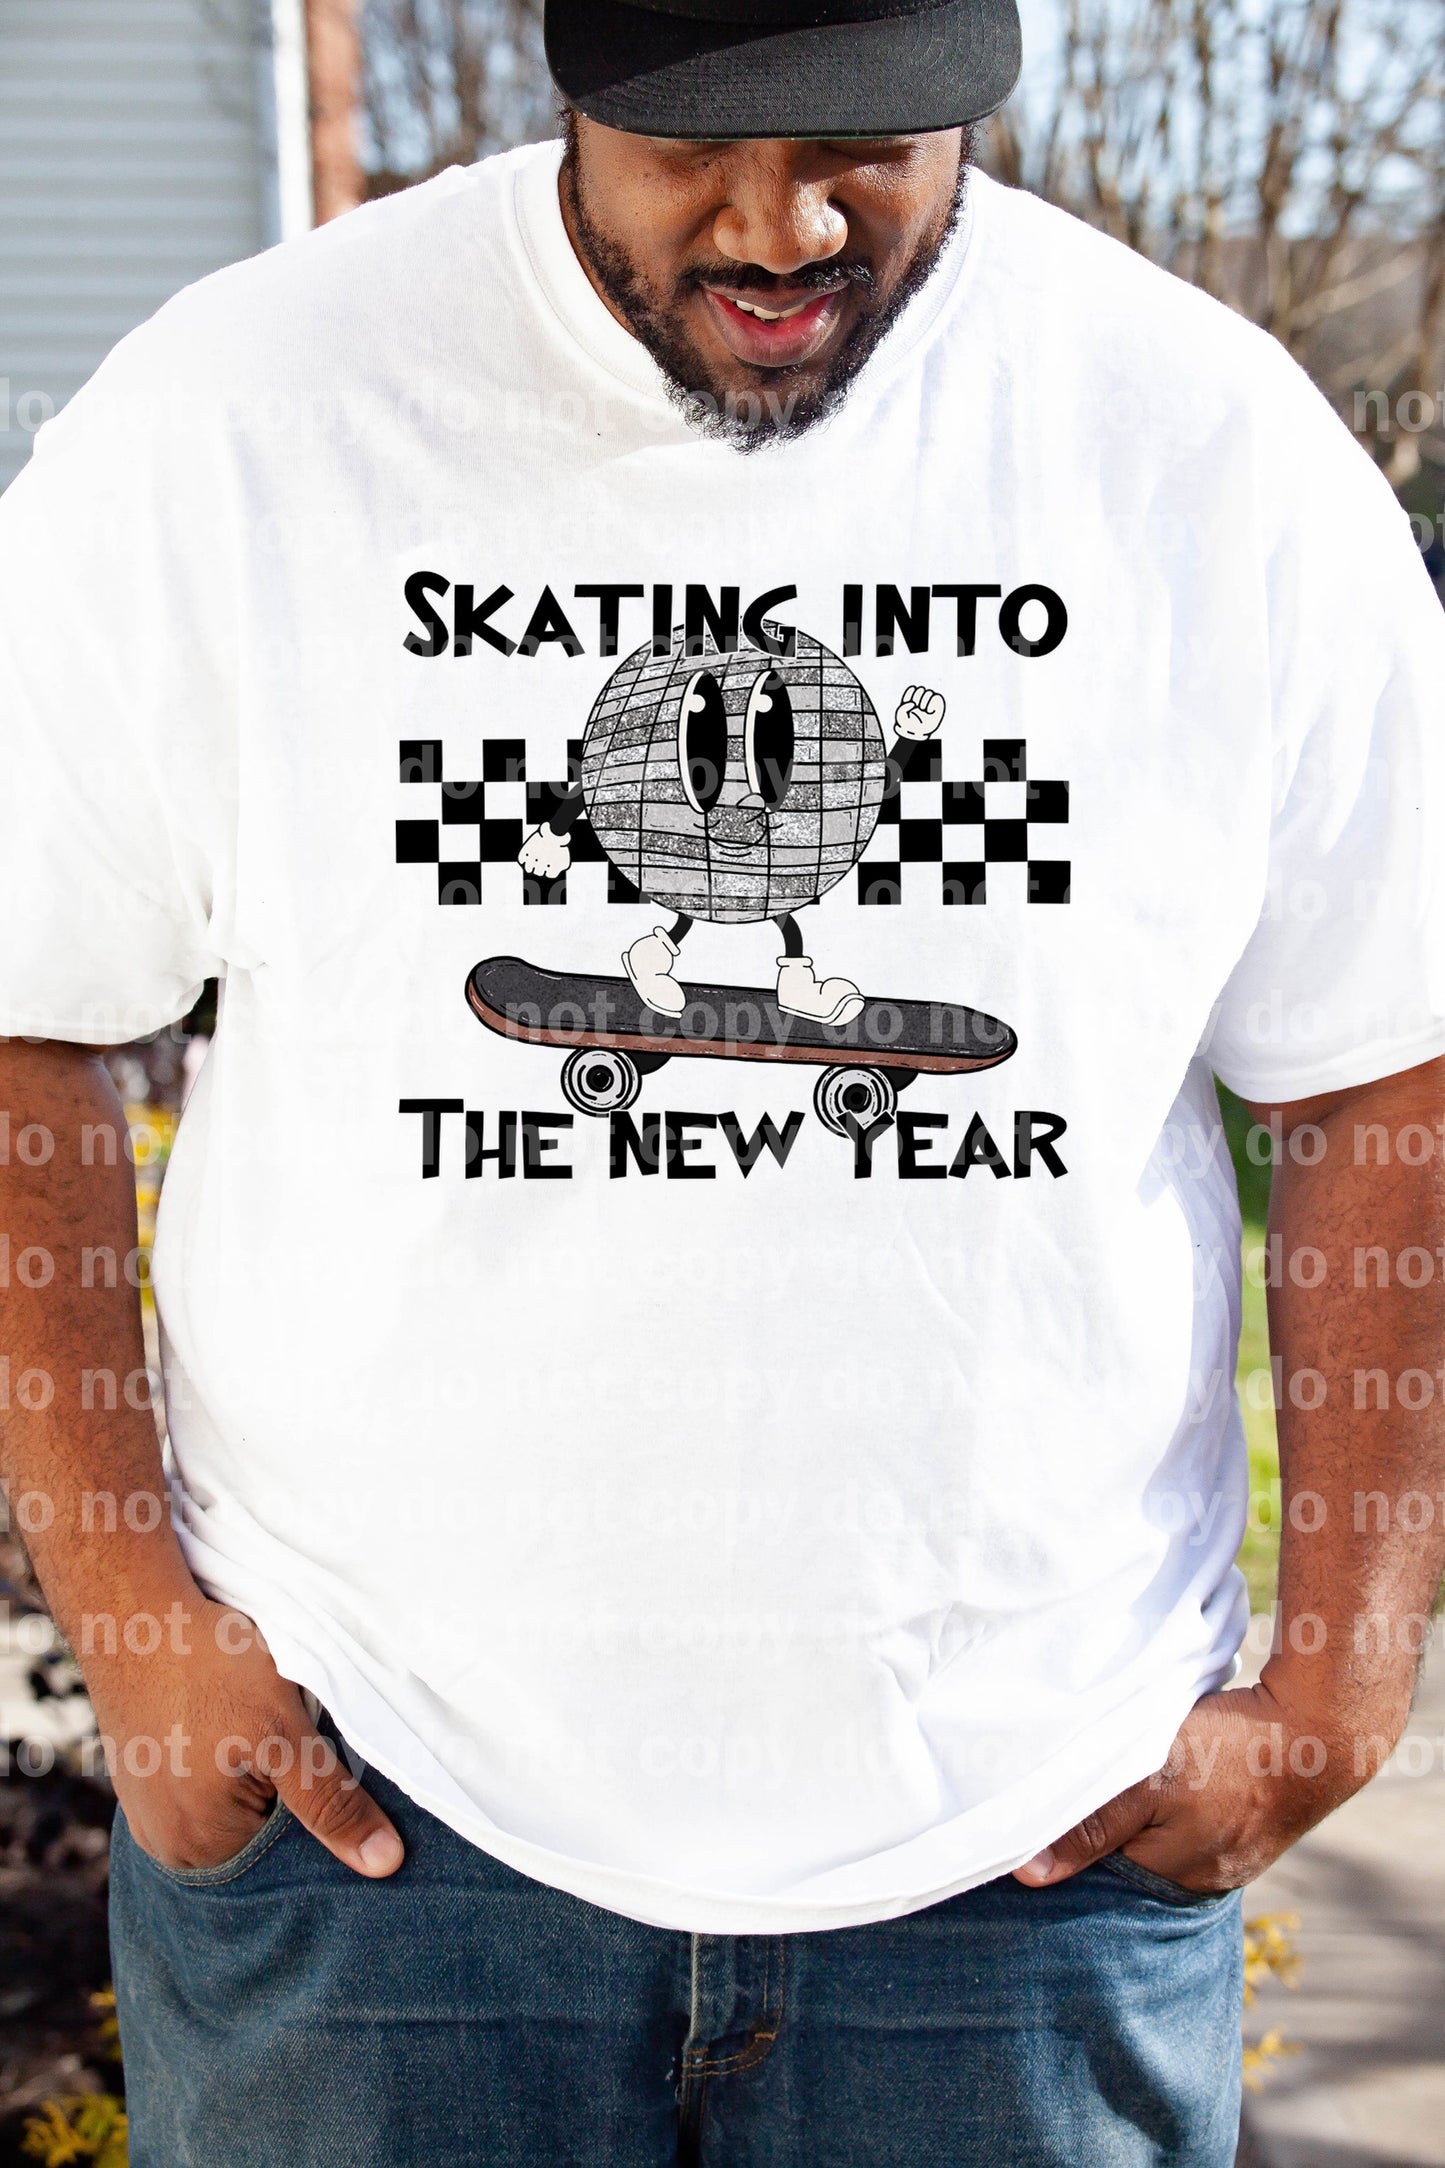 Skating Into The New Year Dream Print or Sublimation Print